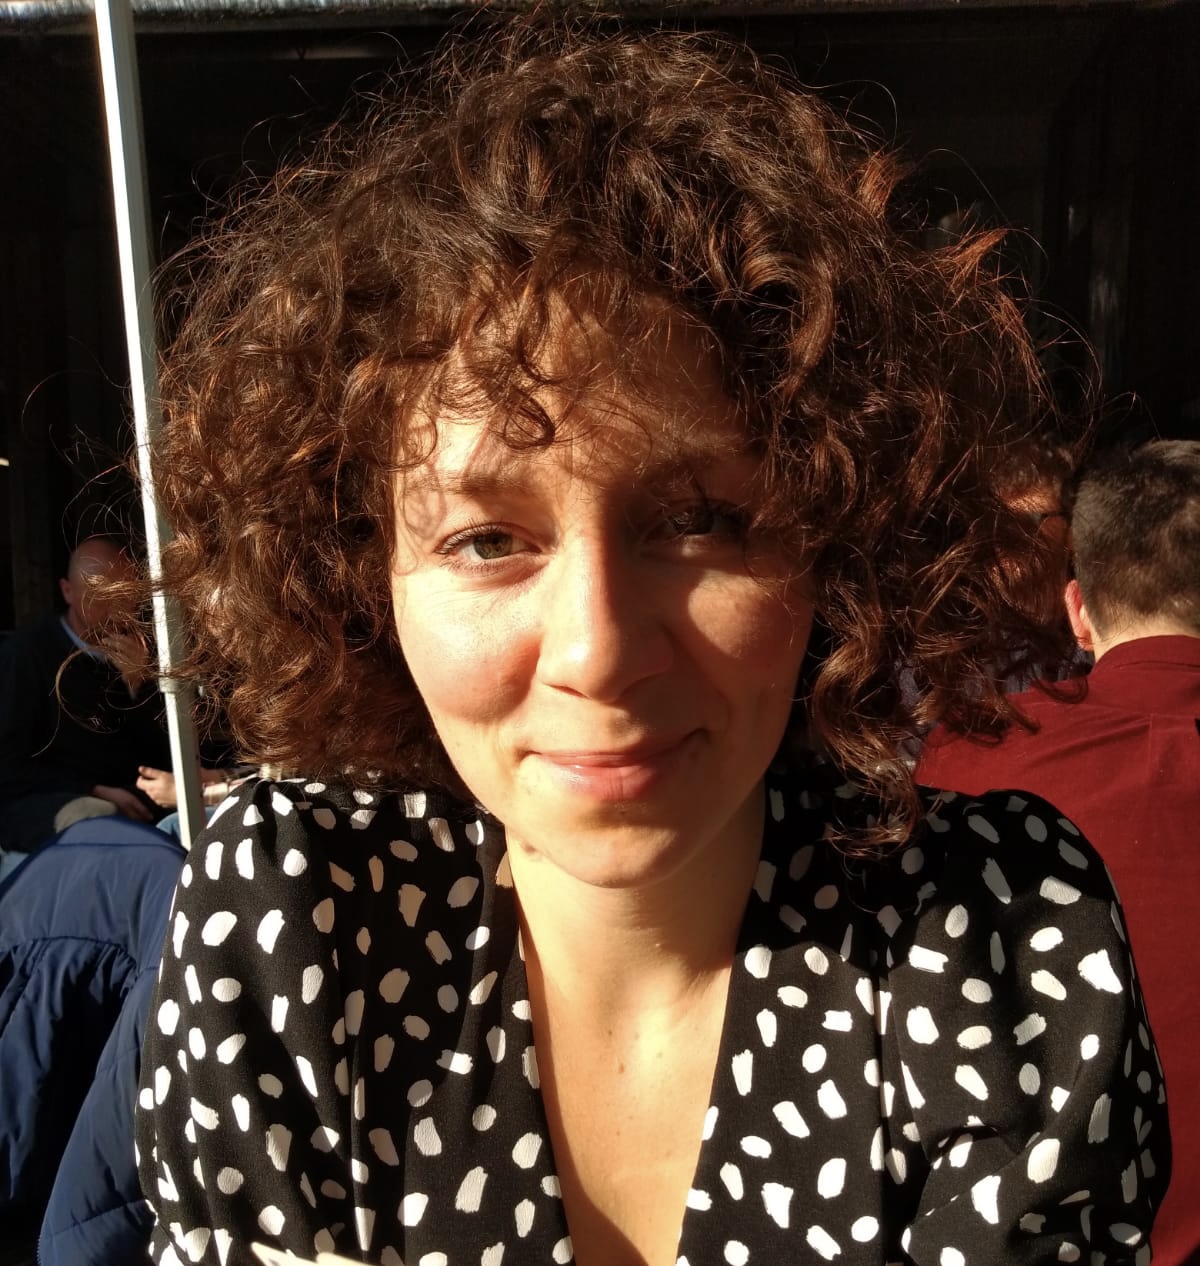 A person with curly hair

Description automatically generated with medium confidence